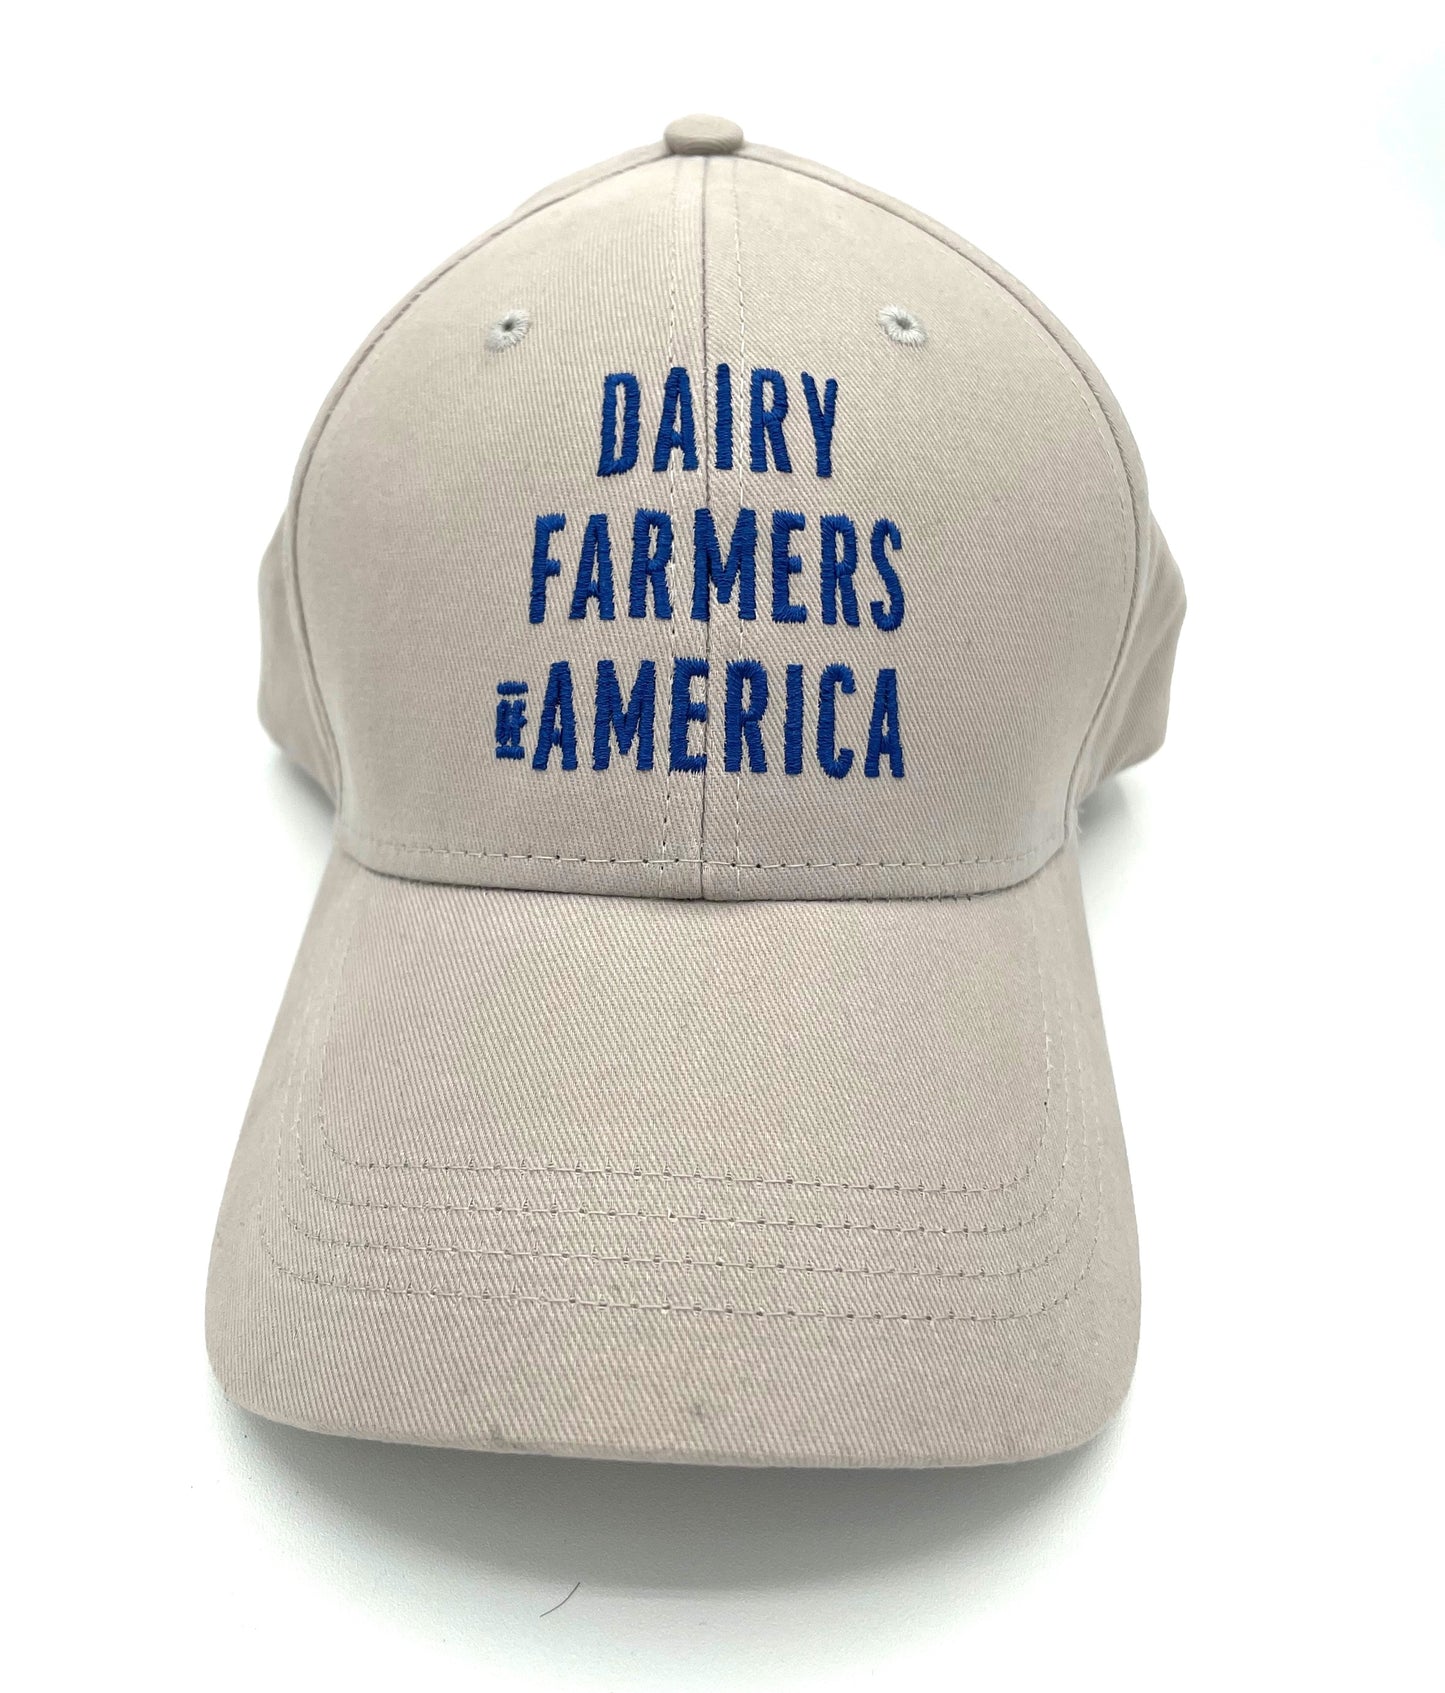 "Dairy Farmers of America, est. 1998" lightweight structured low profile cap - GREY